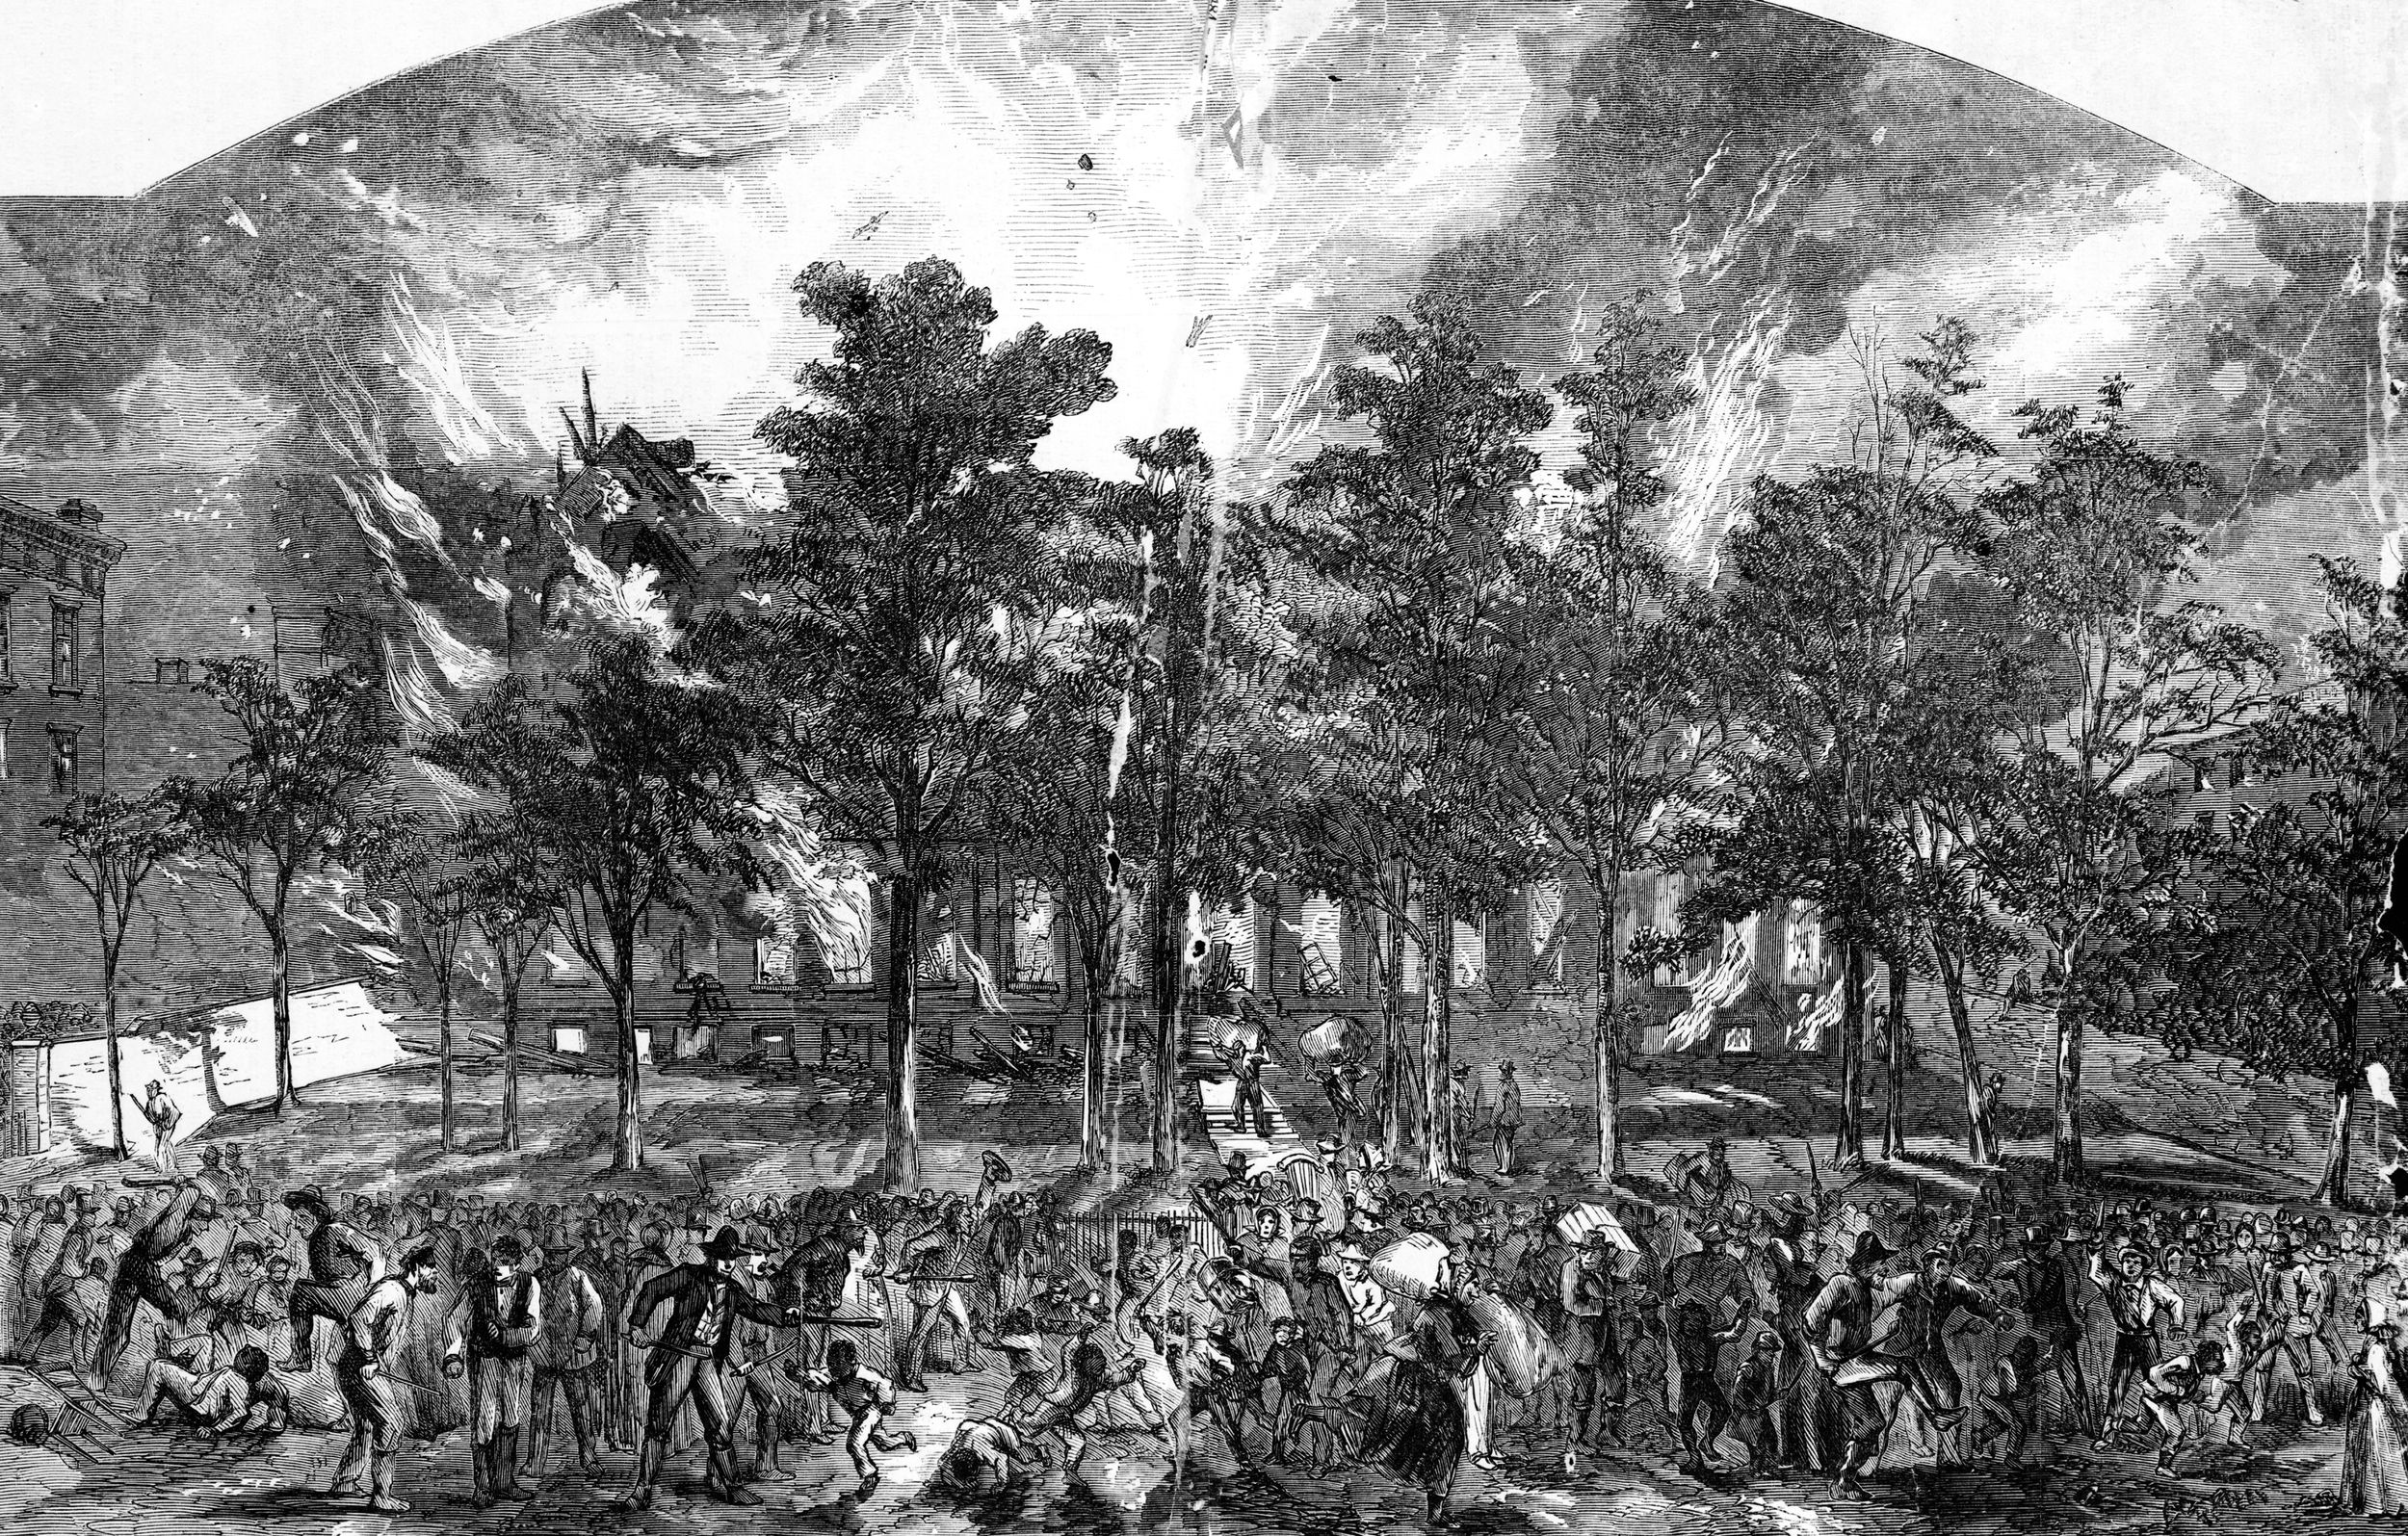 New York City rioters burn and sack the Colored Orphan Asylum on Fifth Avenue and 43rd Street at the height of the rampage. Illustration appeared in Harper’s Weekly, August 1, 1863.